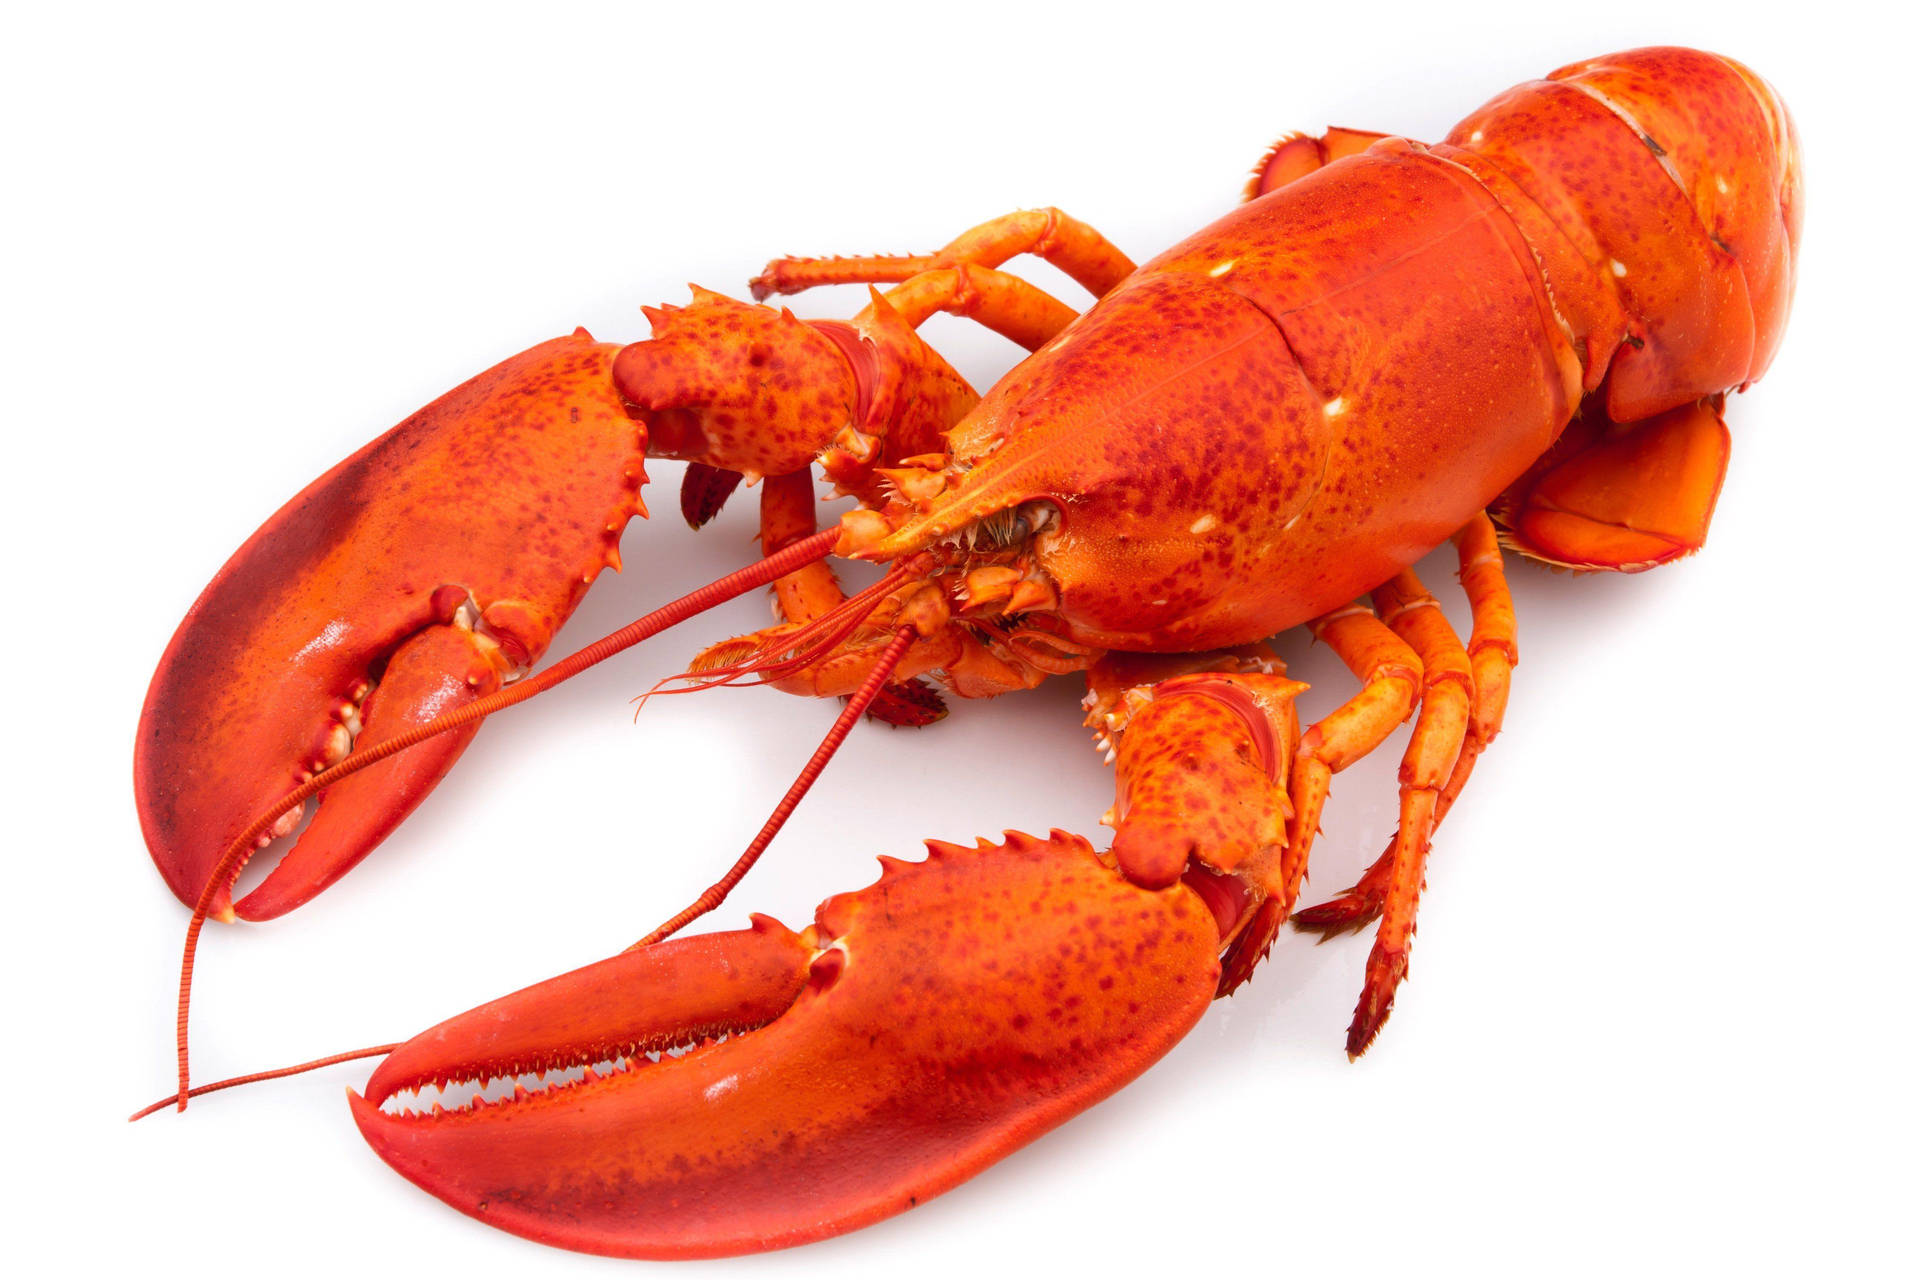 Whole Body Of Cooked Lobster Background